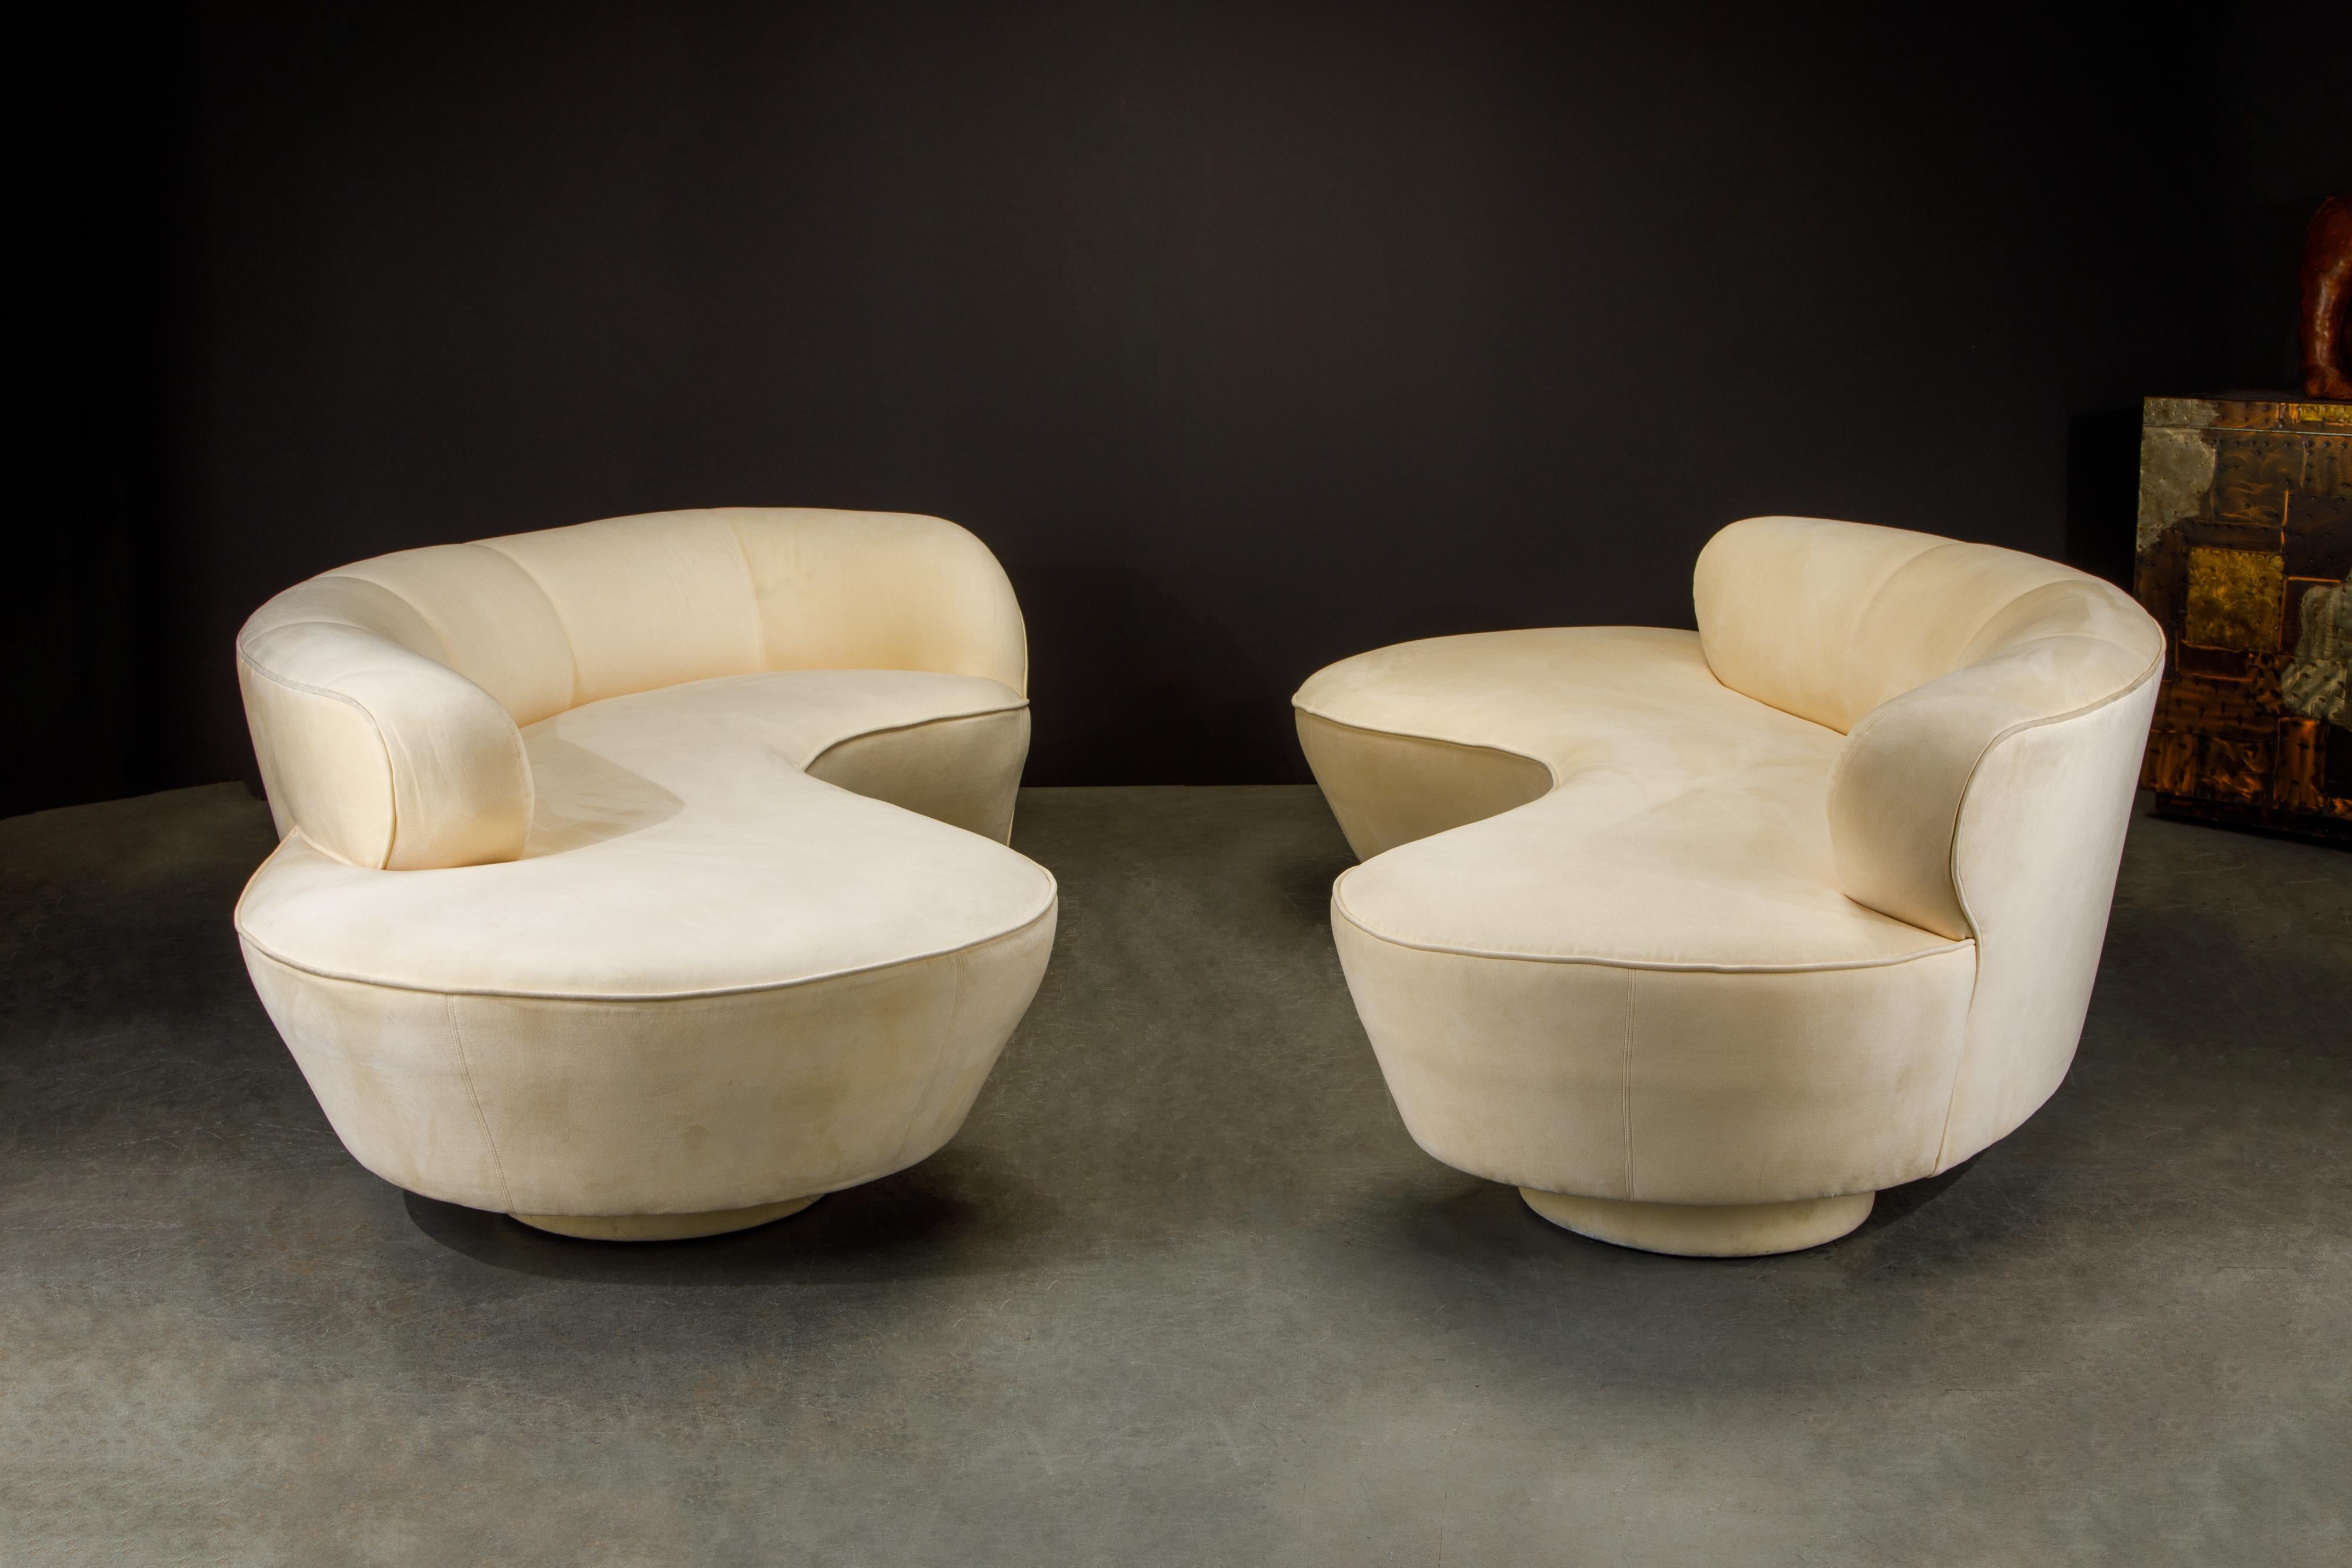 This mesmerizing pair of Vladimir Kagan 'Cloud' sofas were produced by Directional in circa 1980 and in their original soft cream-colored Alcantara fabric with lucite center legs, both sofas signed underneath with Directional labels. Collectors and